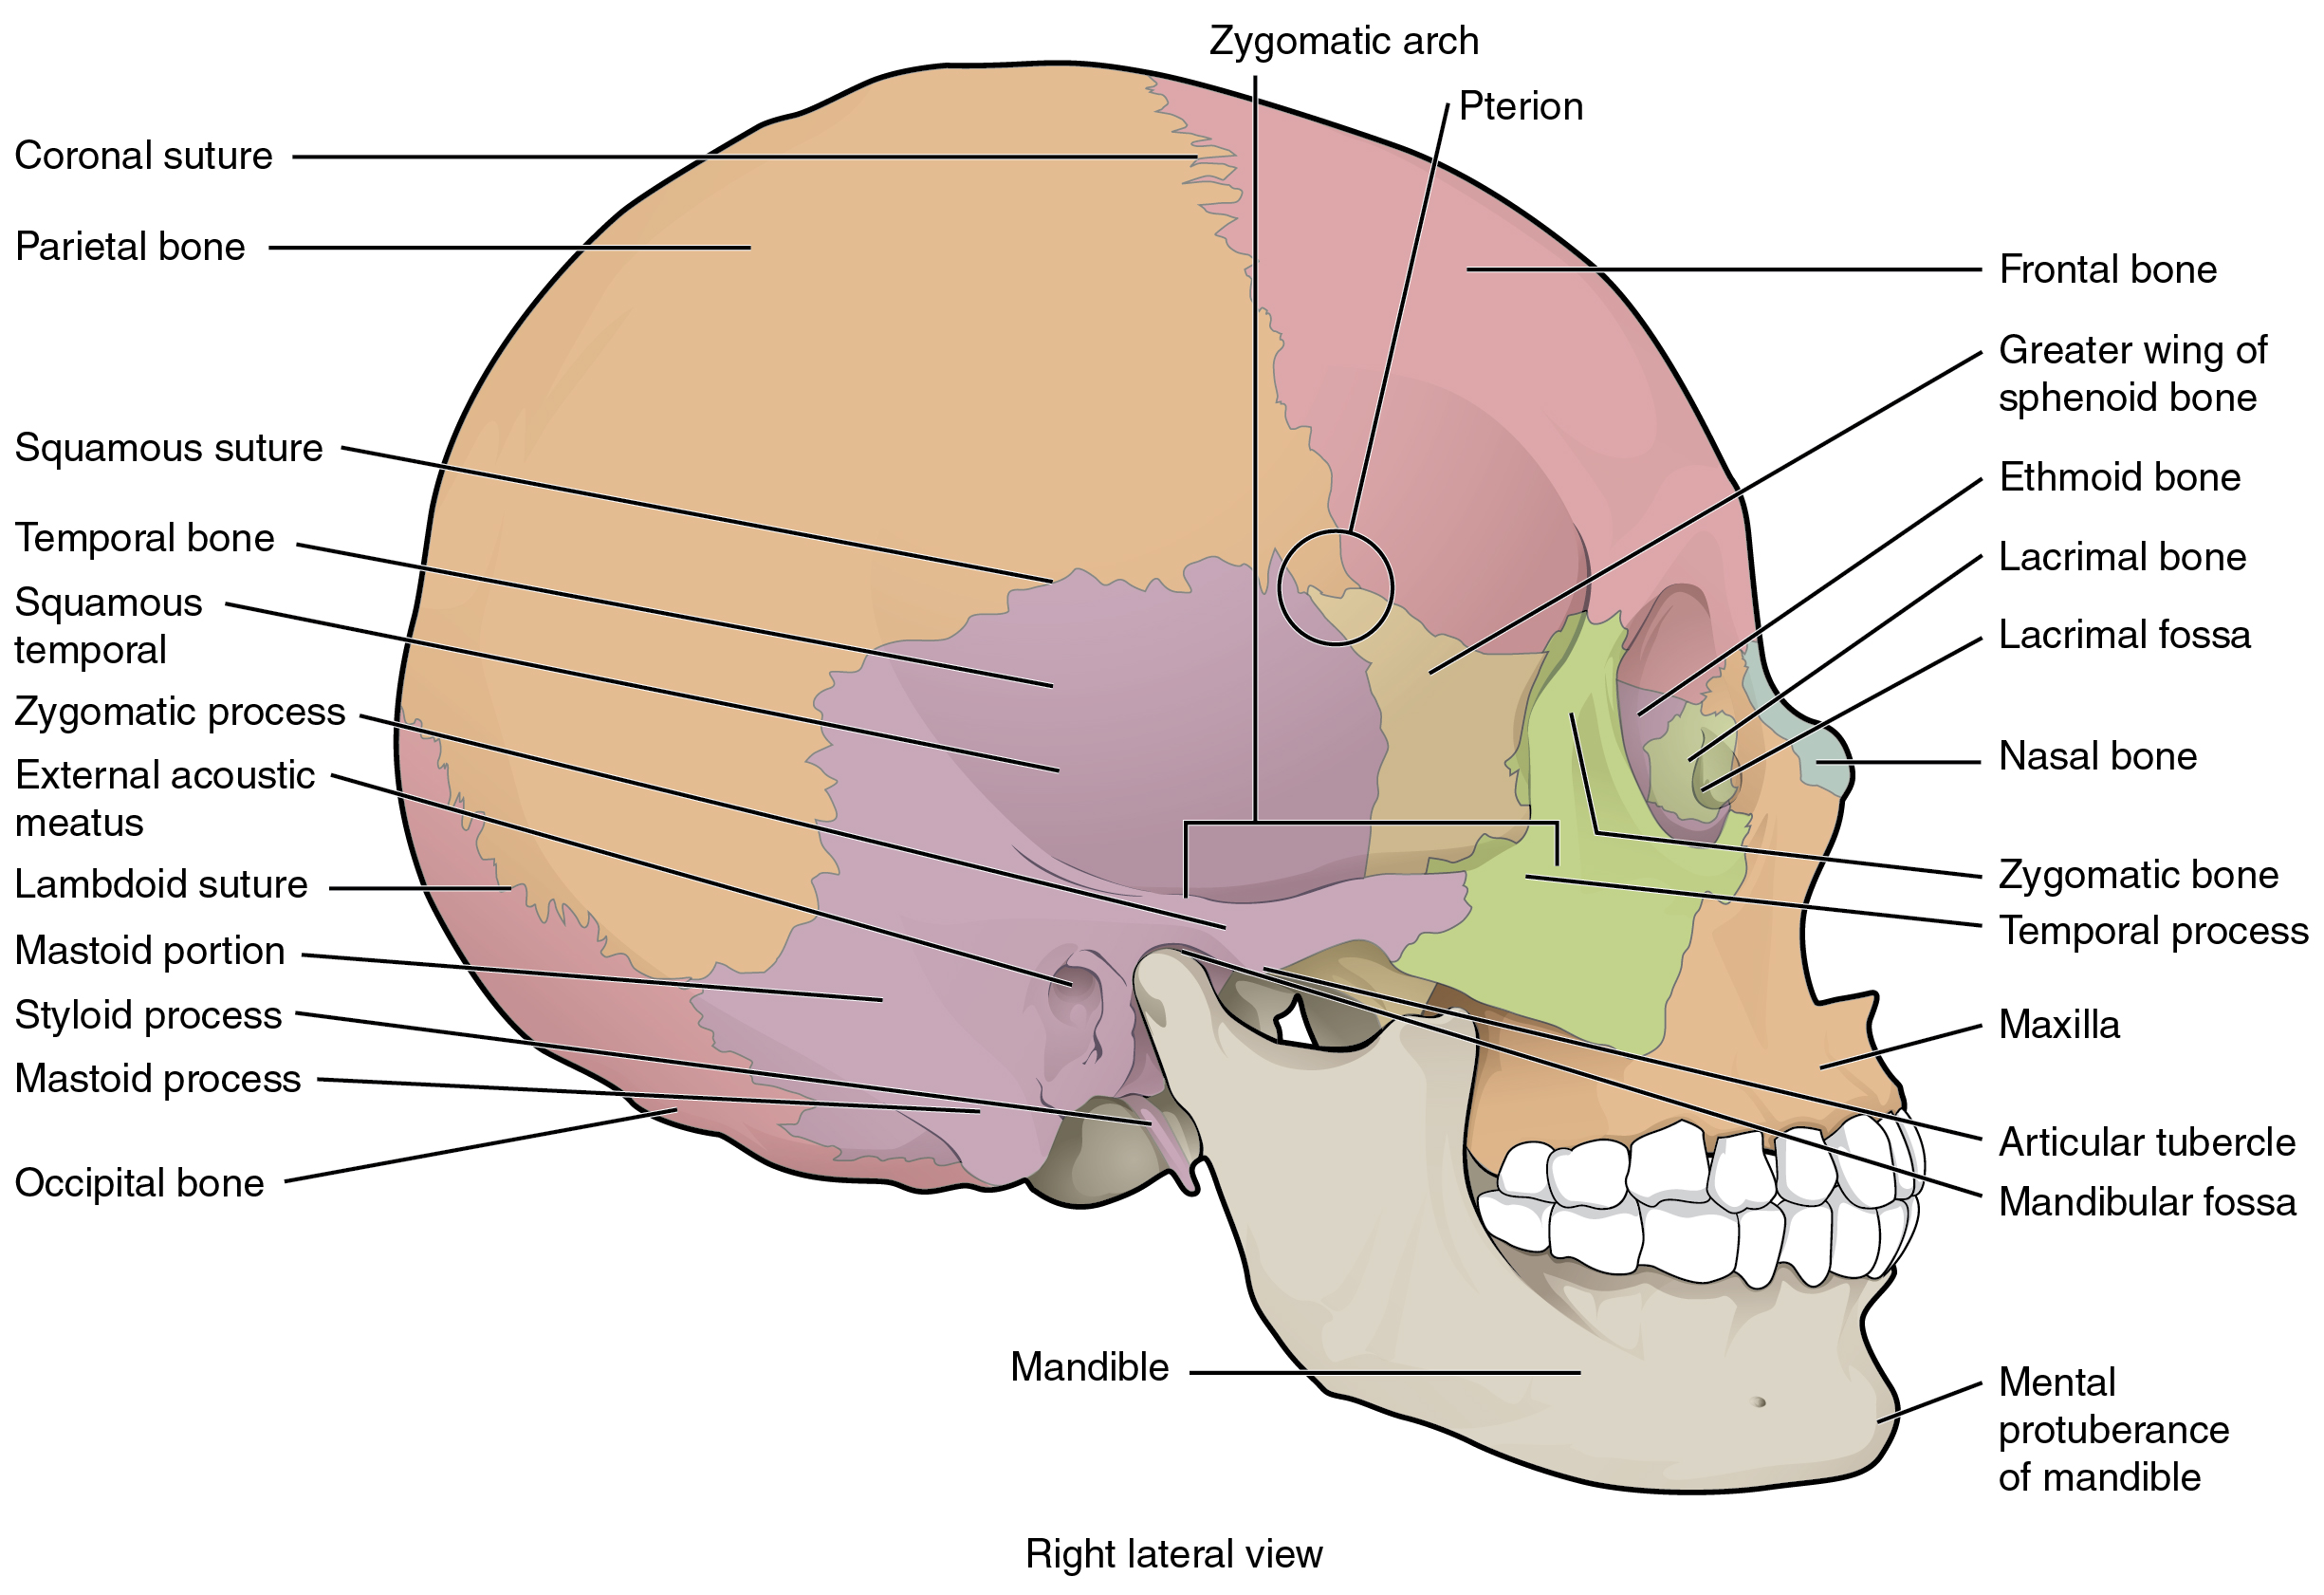 705_Lateral_View_of_Skull-01.jpg